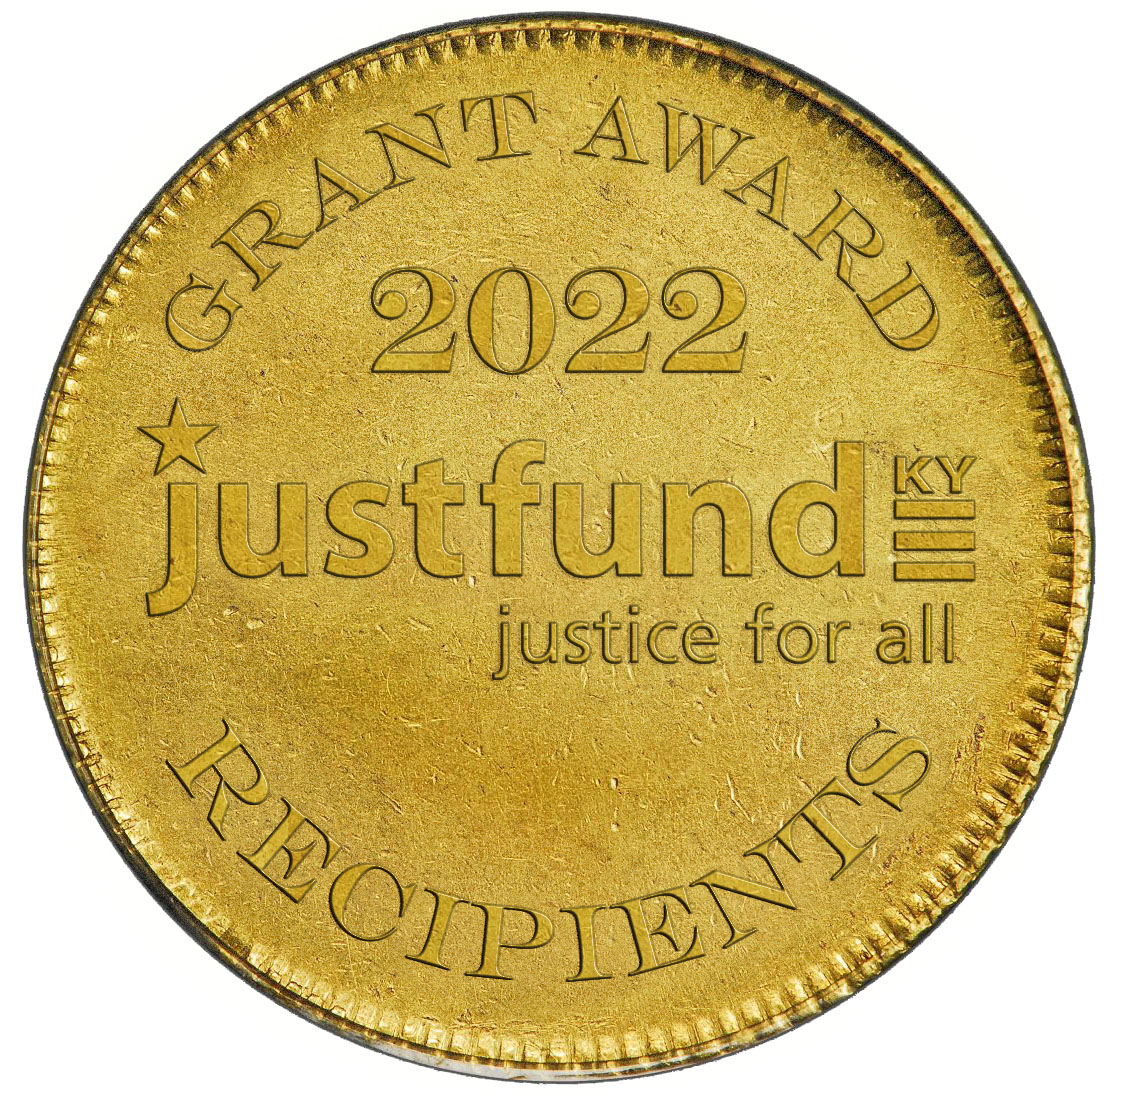 JustFundKY Grant Recipients Coin 2022